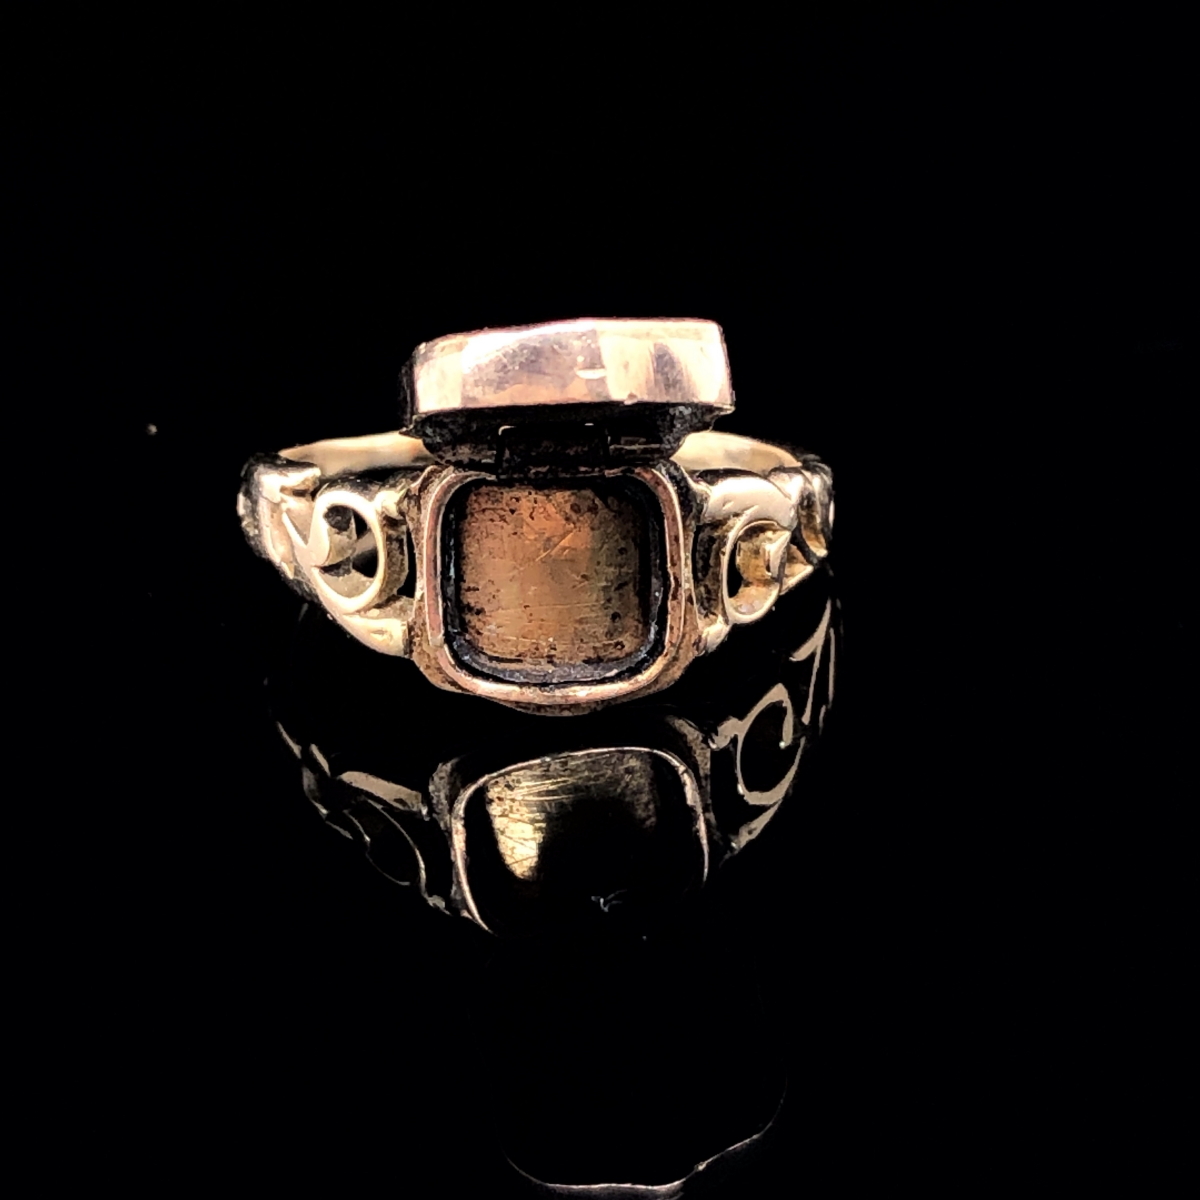 ANTIQUE VICTORIAN YELLOW GOLD POISON RING. THE SHIELD FRONT HINGED COVER OPENS TO REVEAL A HIDDEN - Image 3 of 5